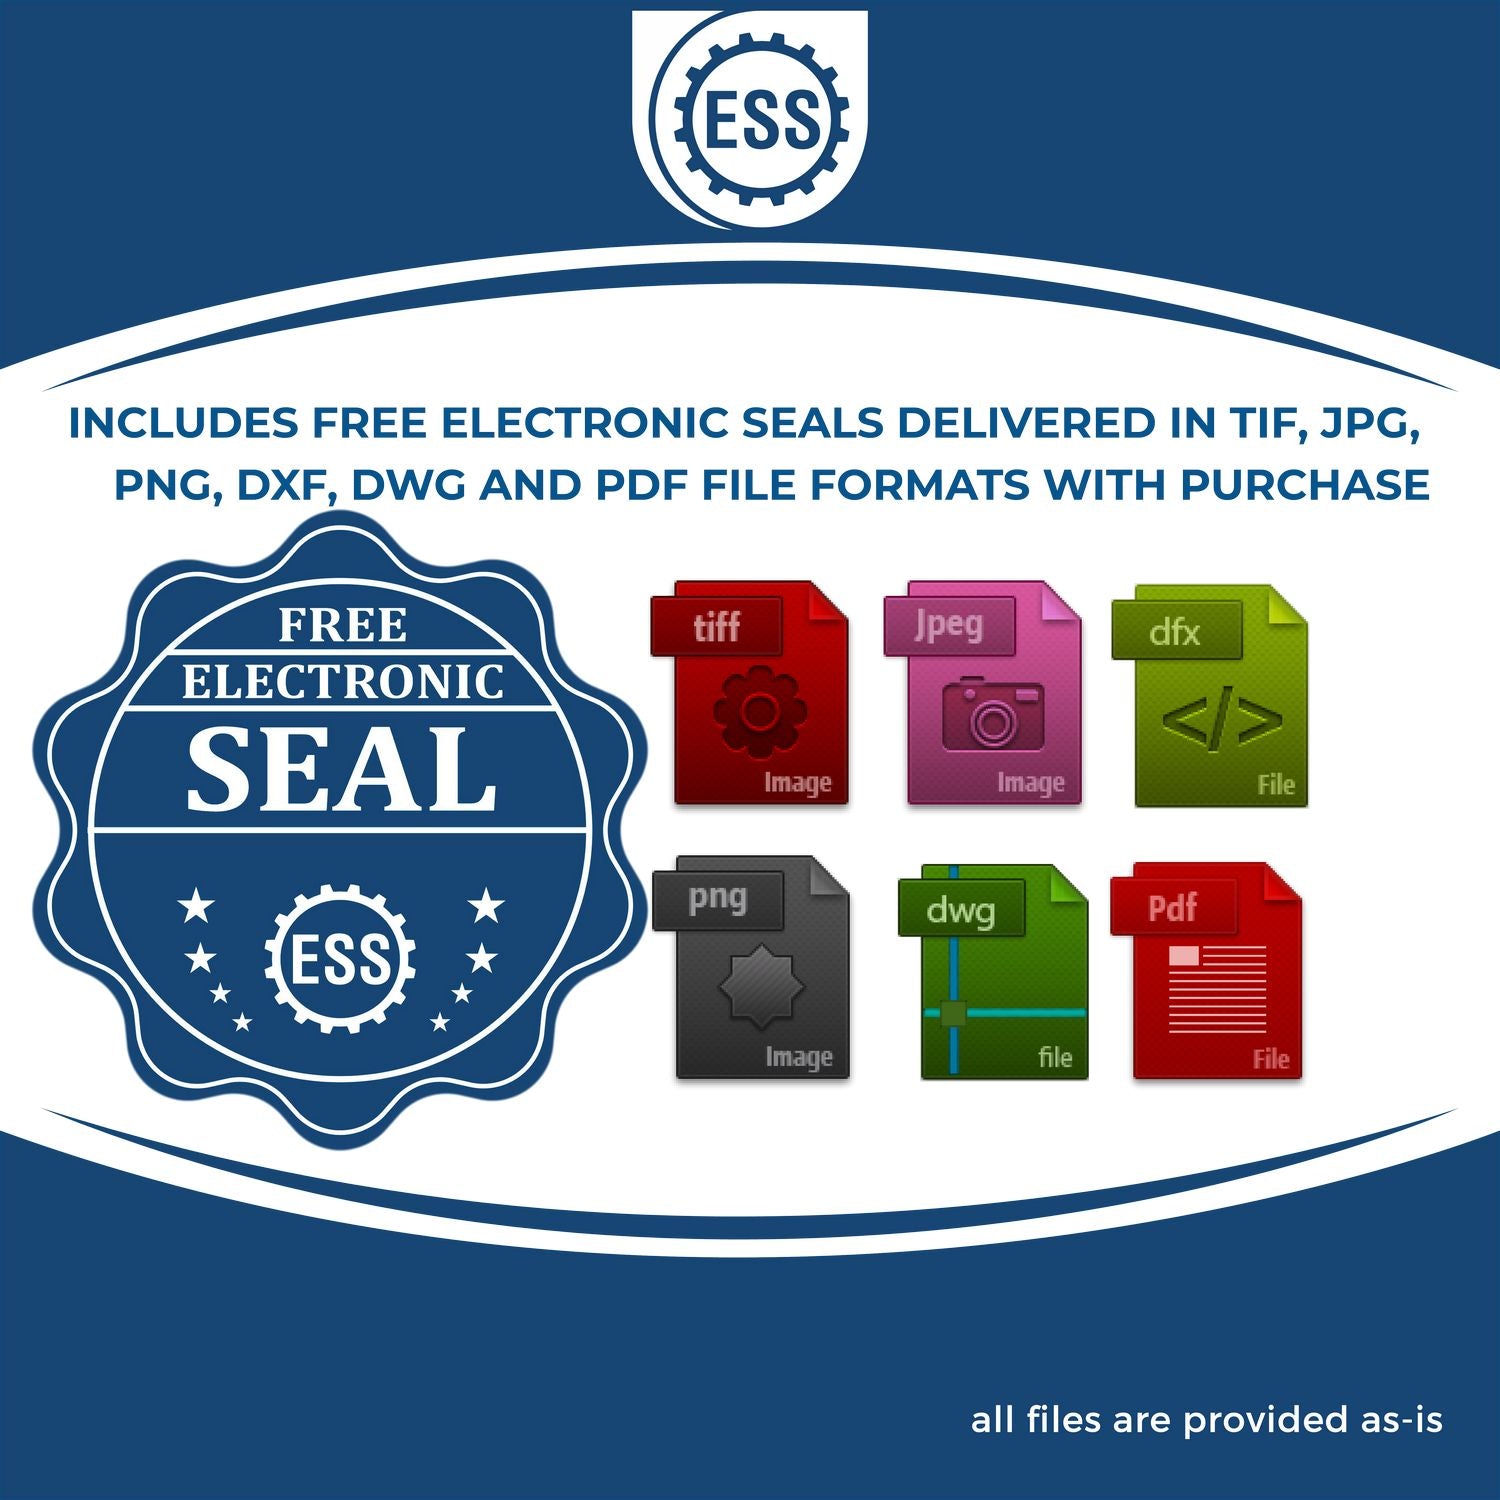 An infographic for the free electronic seal for the Premium MaxLight Pre-Inked District of Columbia Engineering Stamp illustrating the different file type icons such as DXF, DWG, TIF, JPG and PNG.